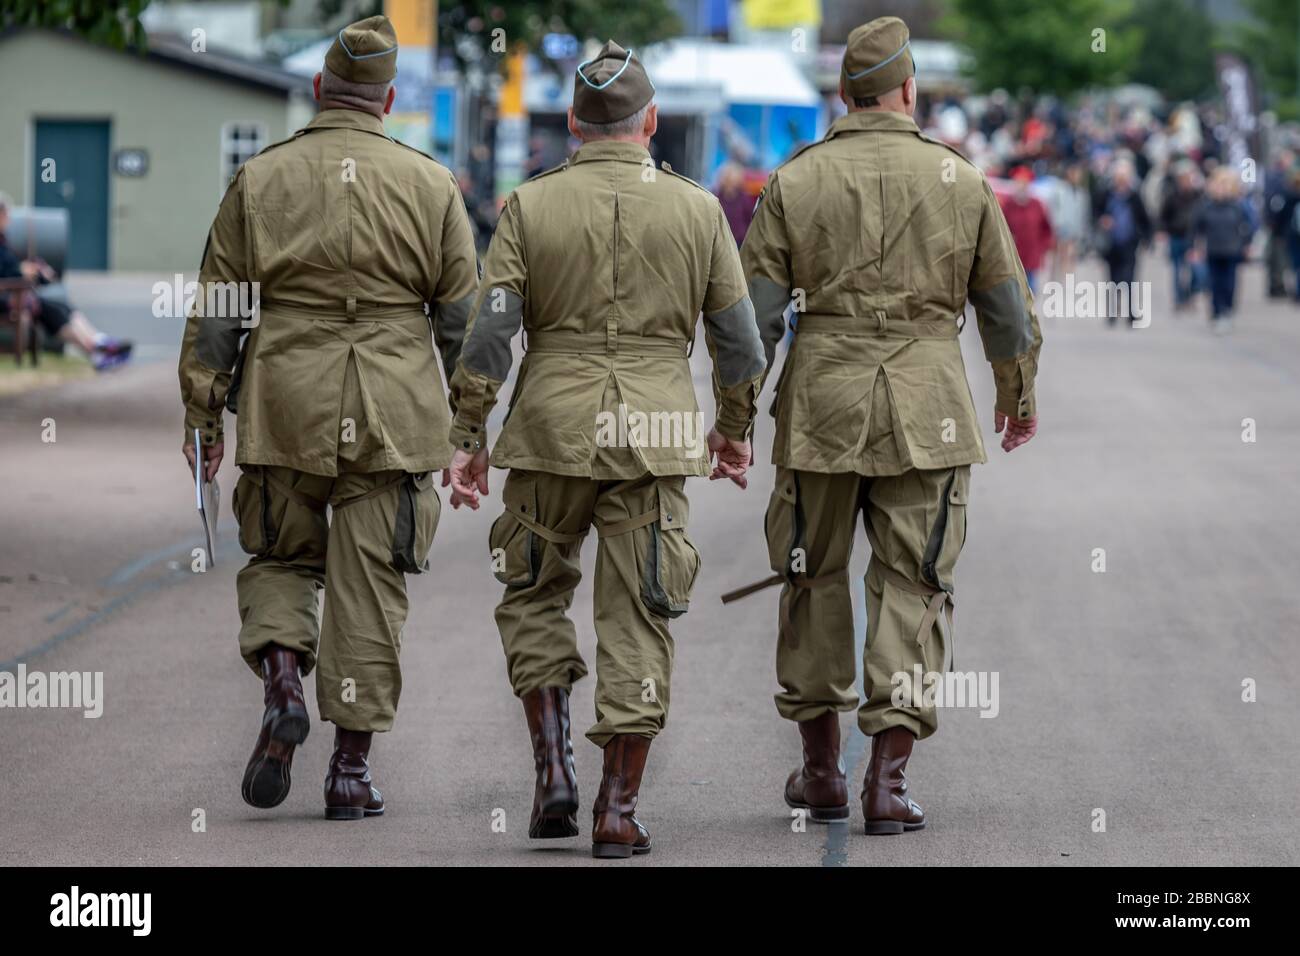 Three Soldiers go for a walk during the Daks over Normandy event at IWM Duxford, Duxford Airfield, Cambridgeshire, UK Stock Photo